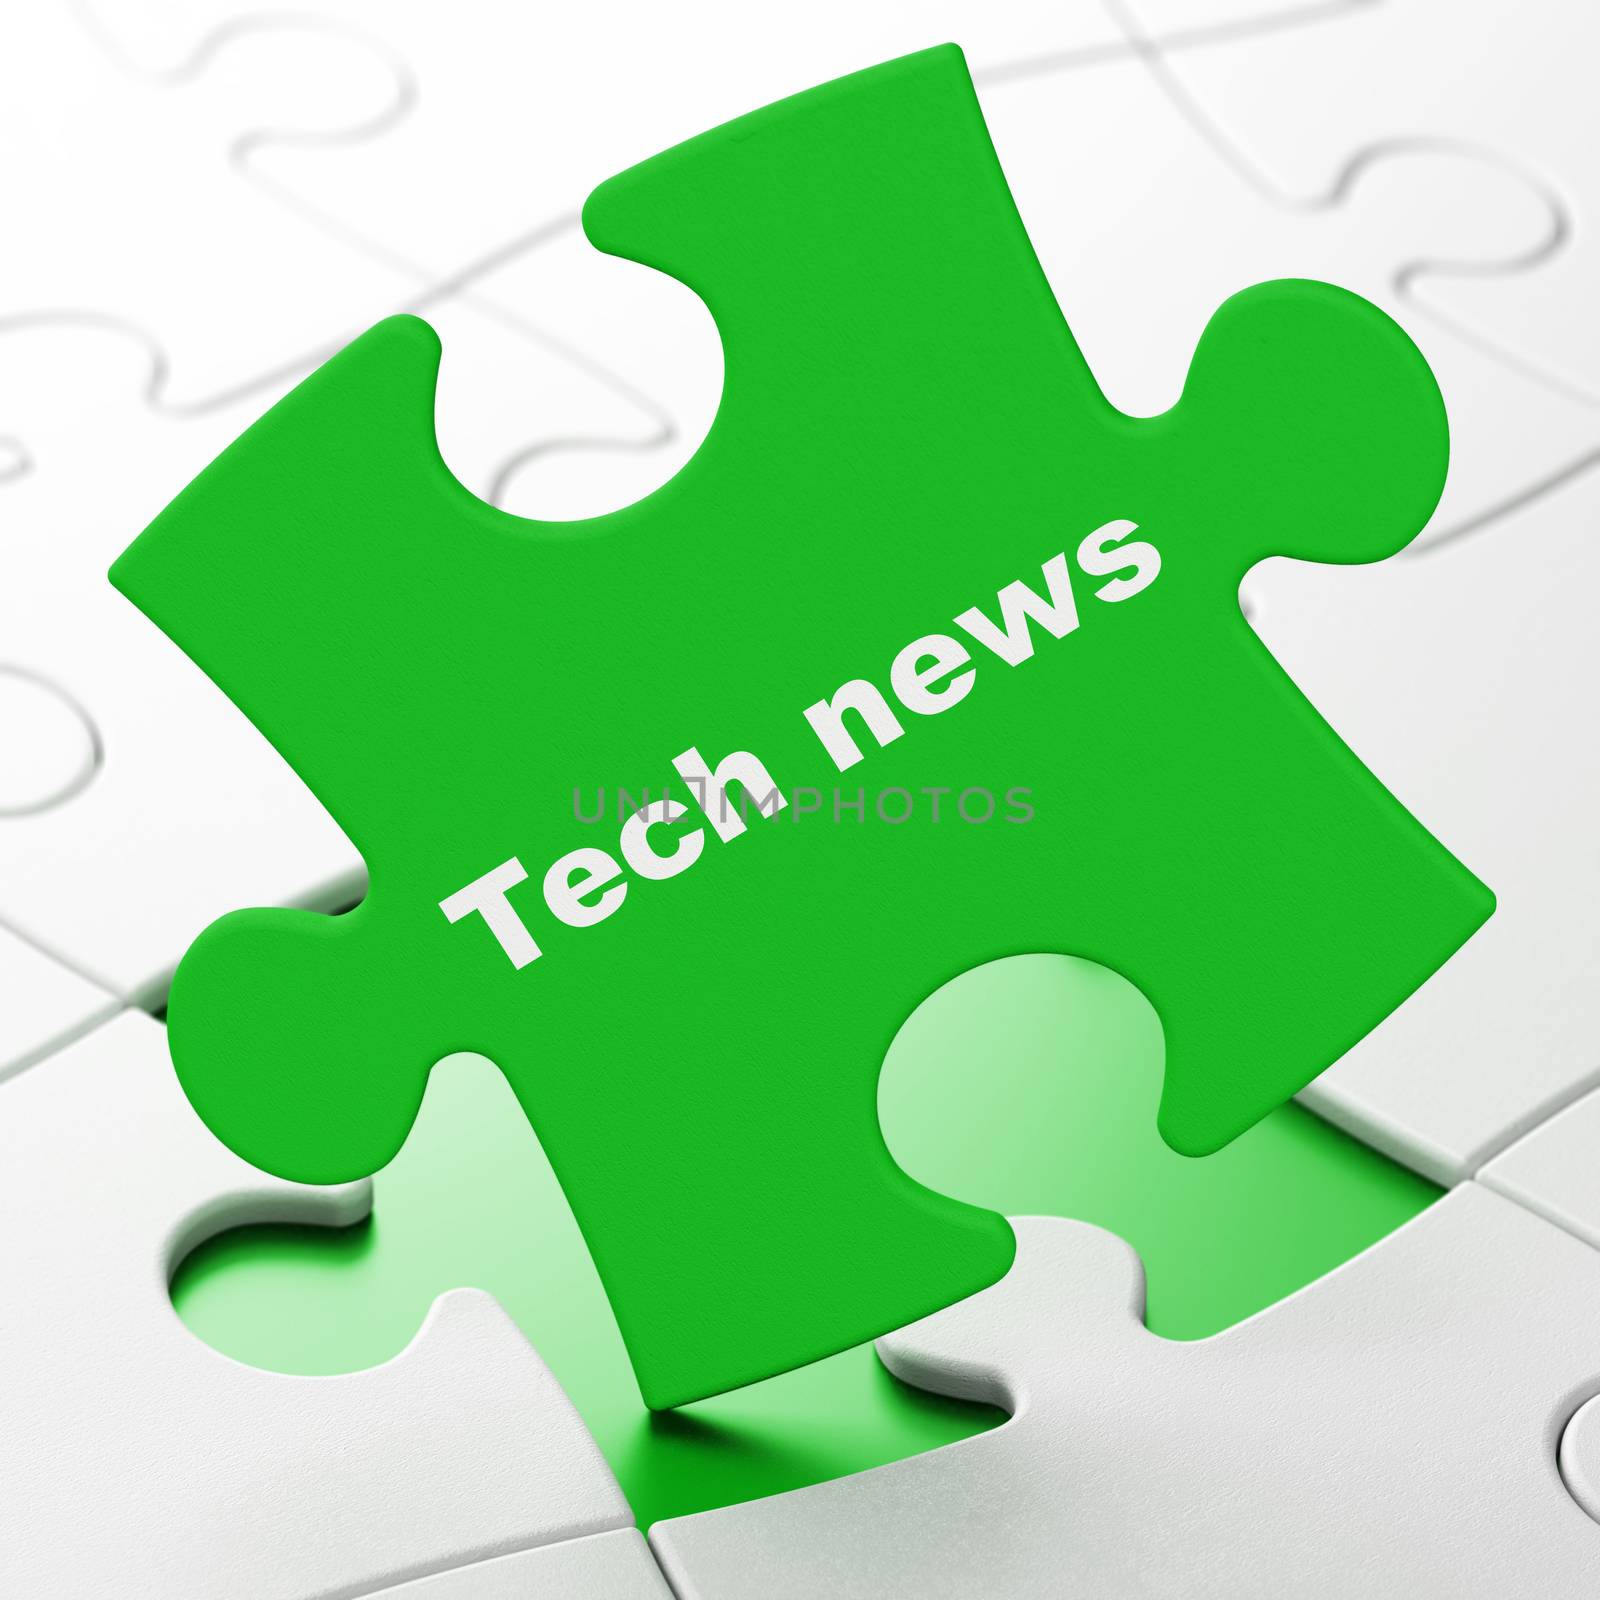 News concept: Tech News on puzzle background by maxkabakov